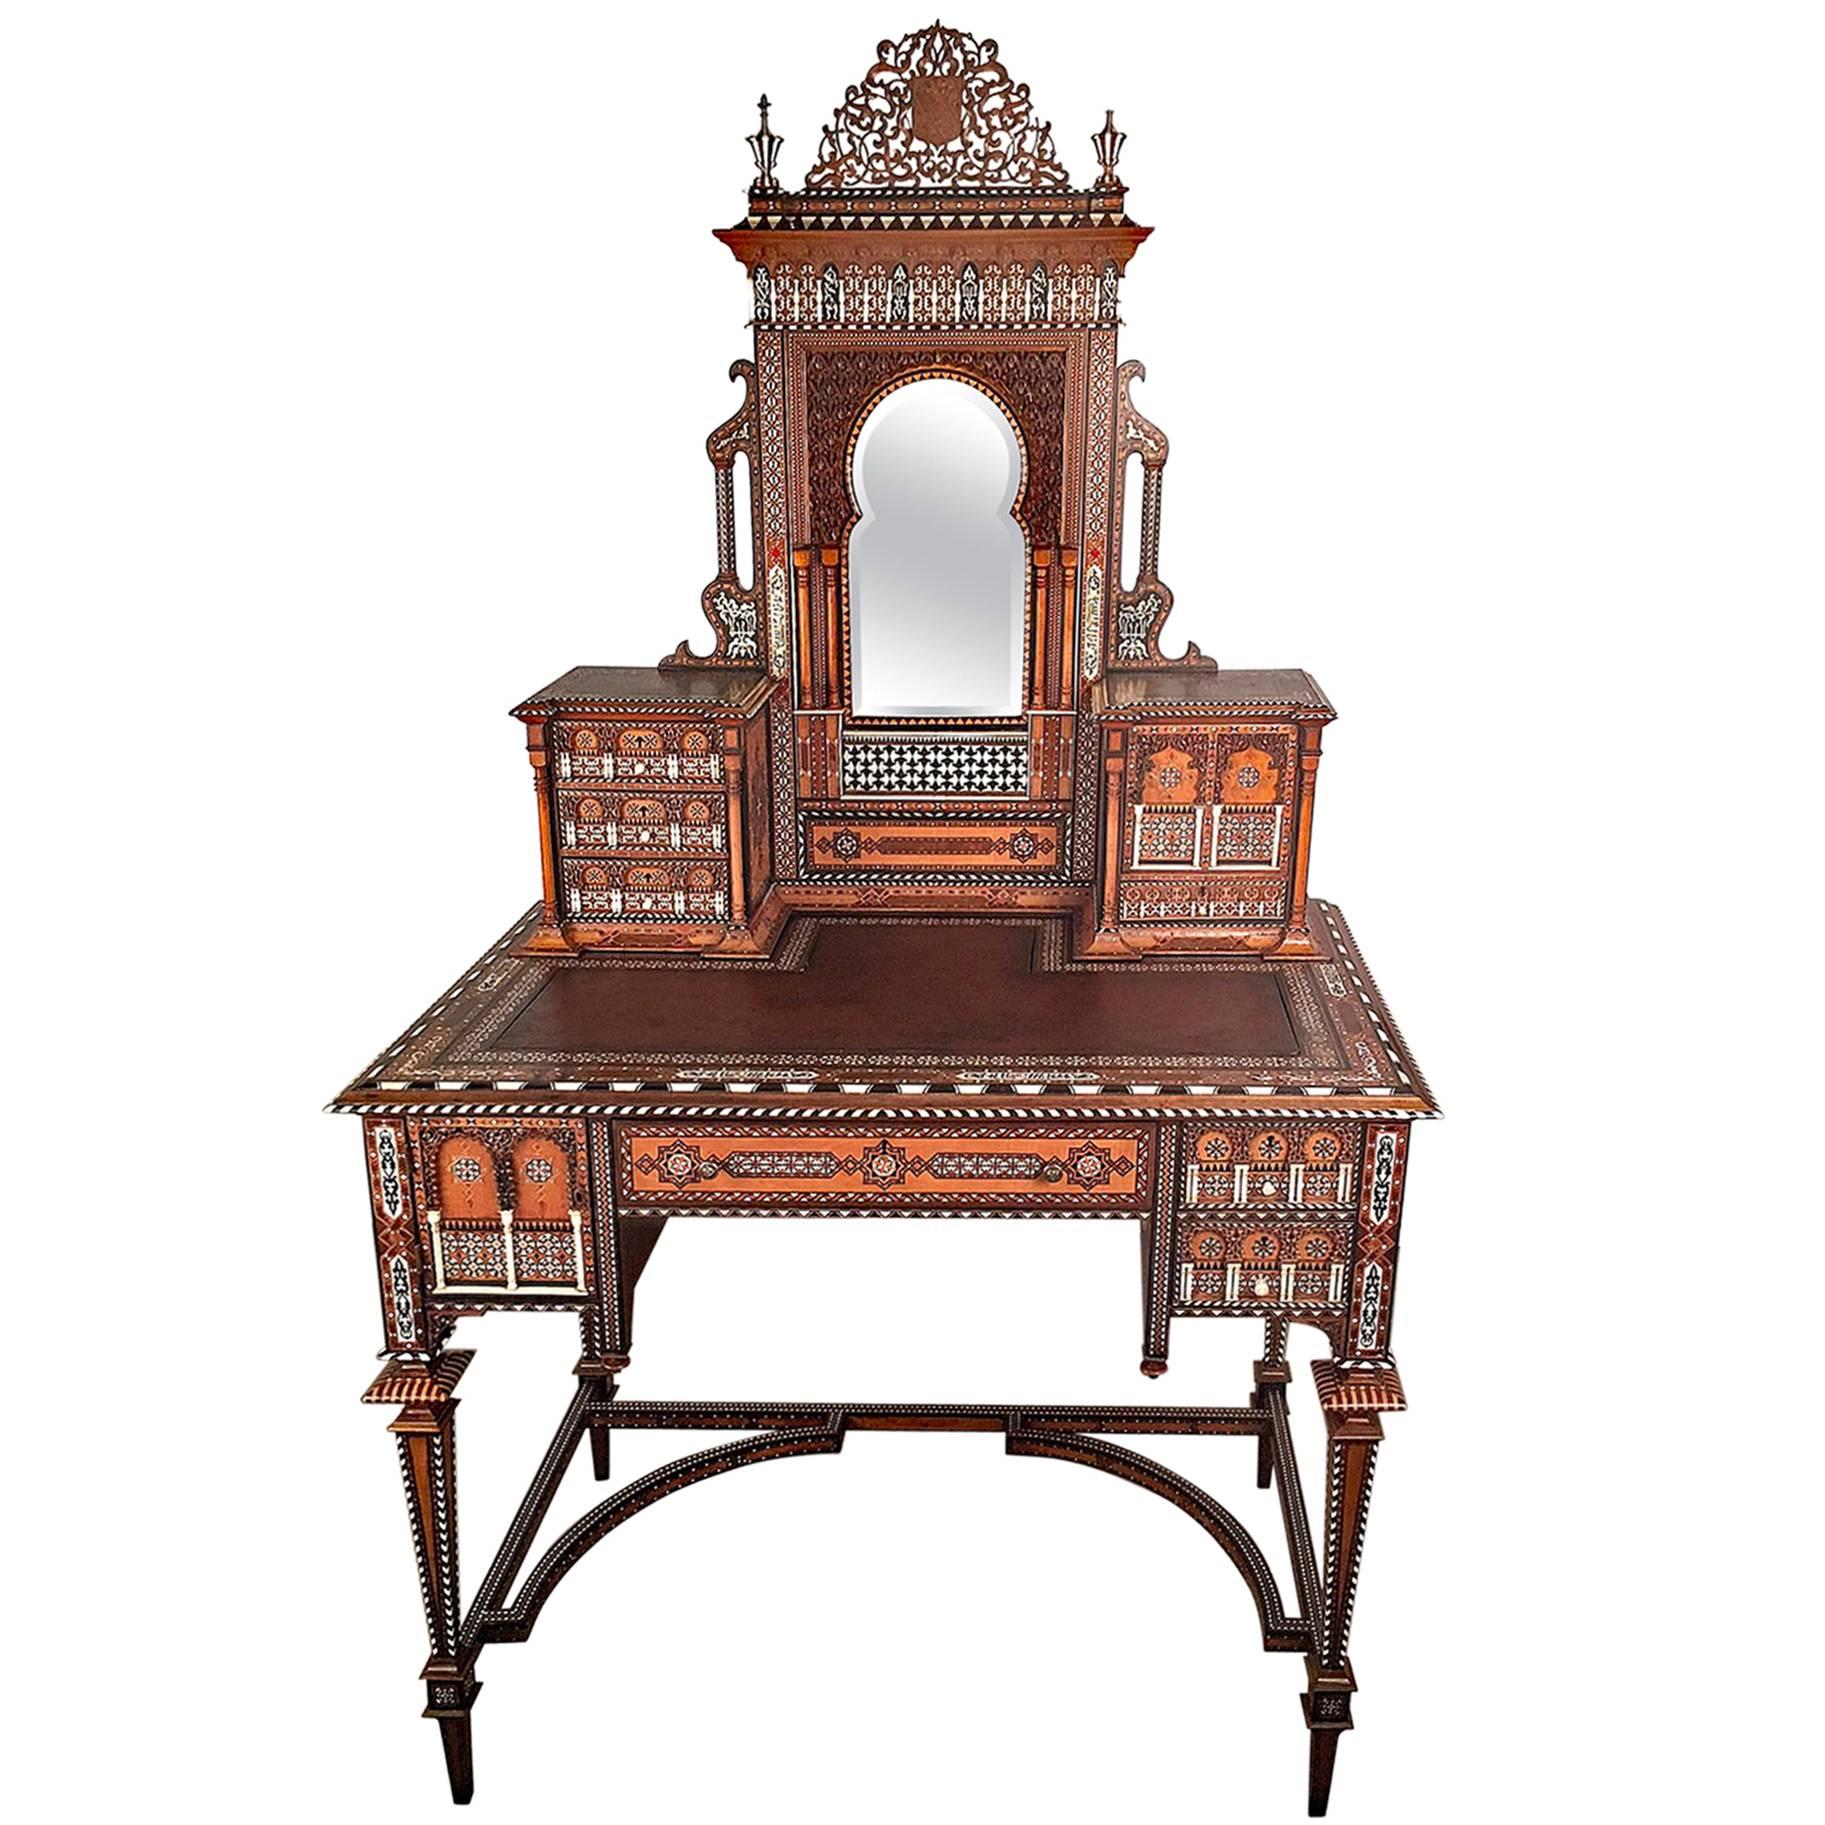 A superb Ottoman Bonheur du jour or dressing table of outstanding quality, The superstructure surmounted by a shield- shaped crest and inscription (presumably that of the family for which the piece was commissioned) above a mirhab shaped beveled